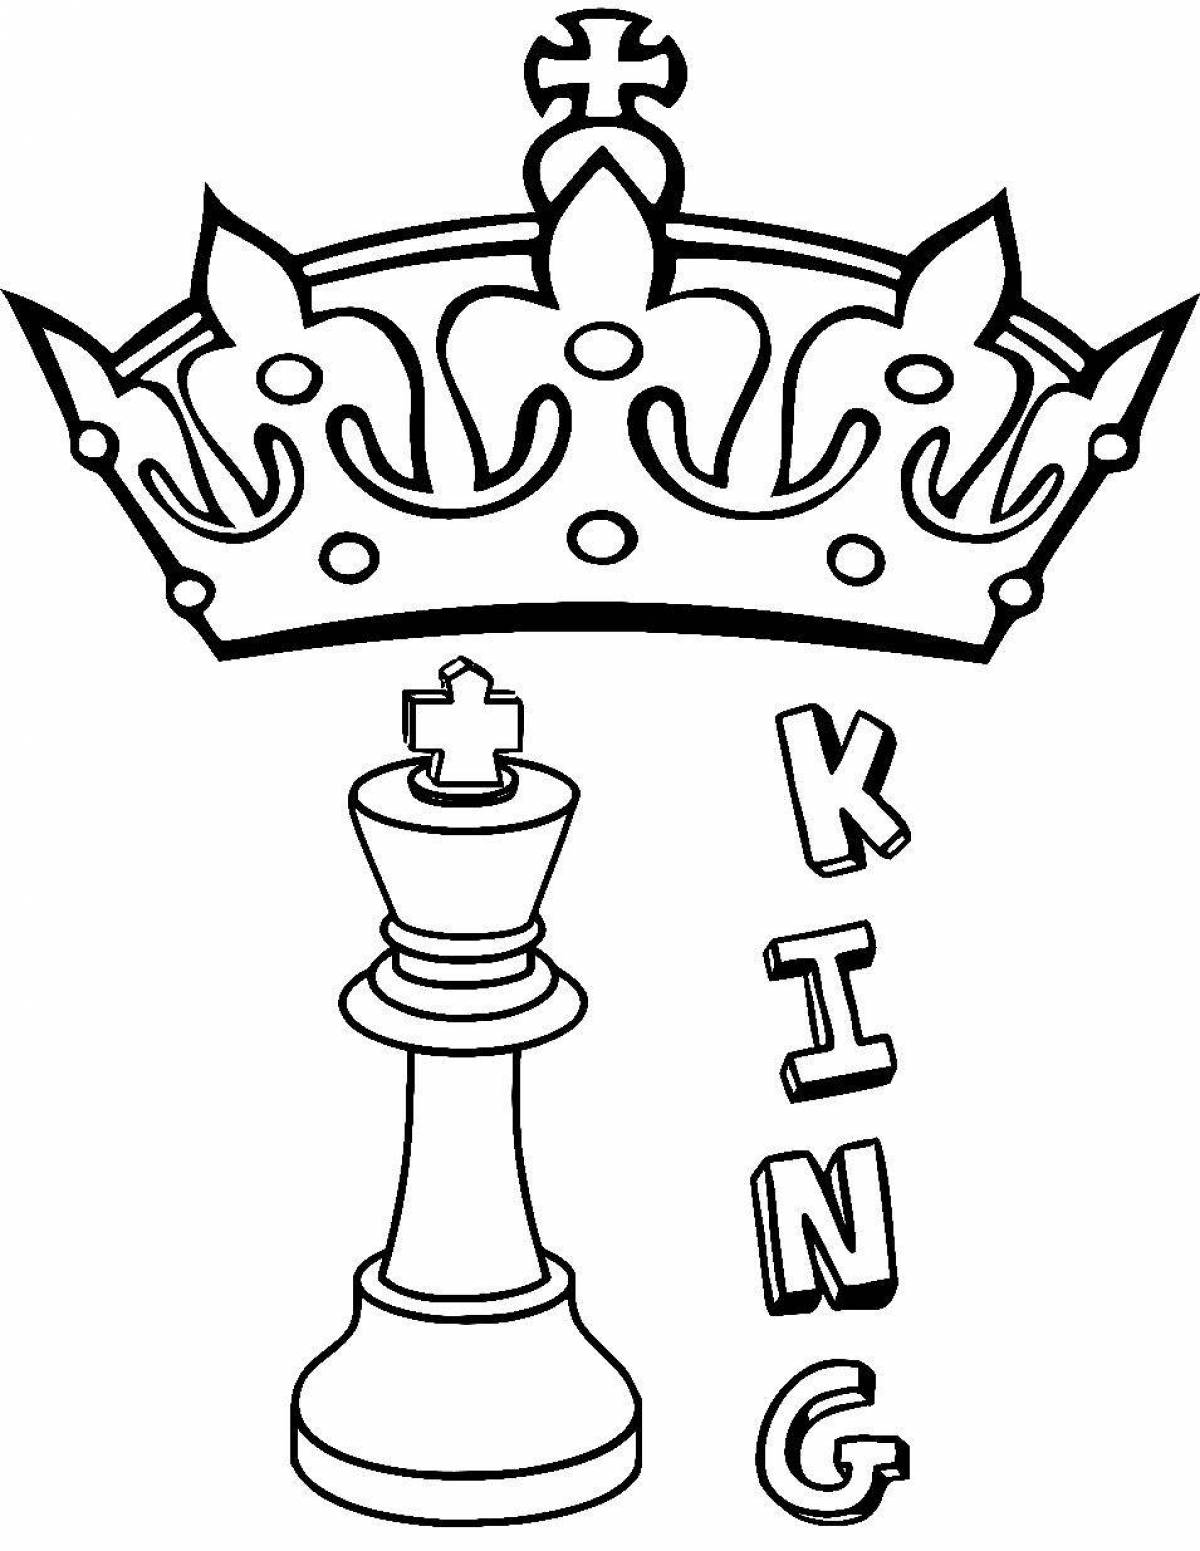 Coloring shining chess queen